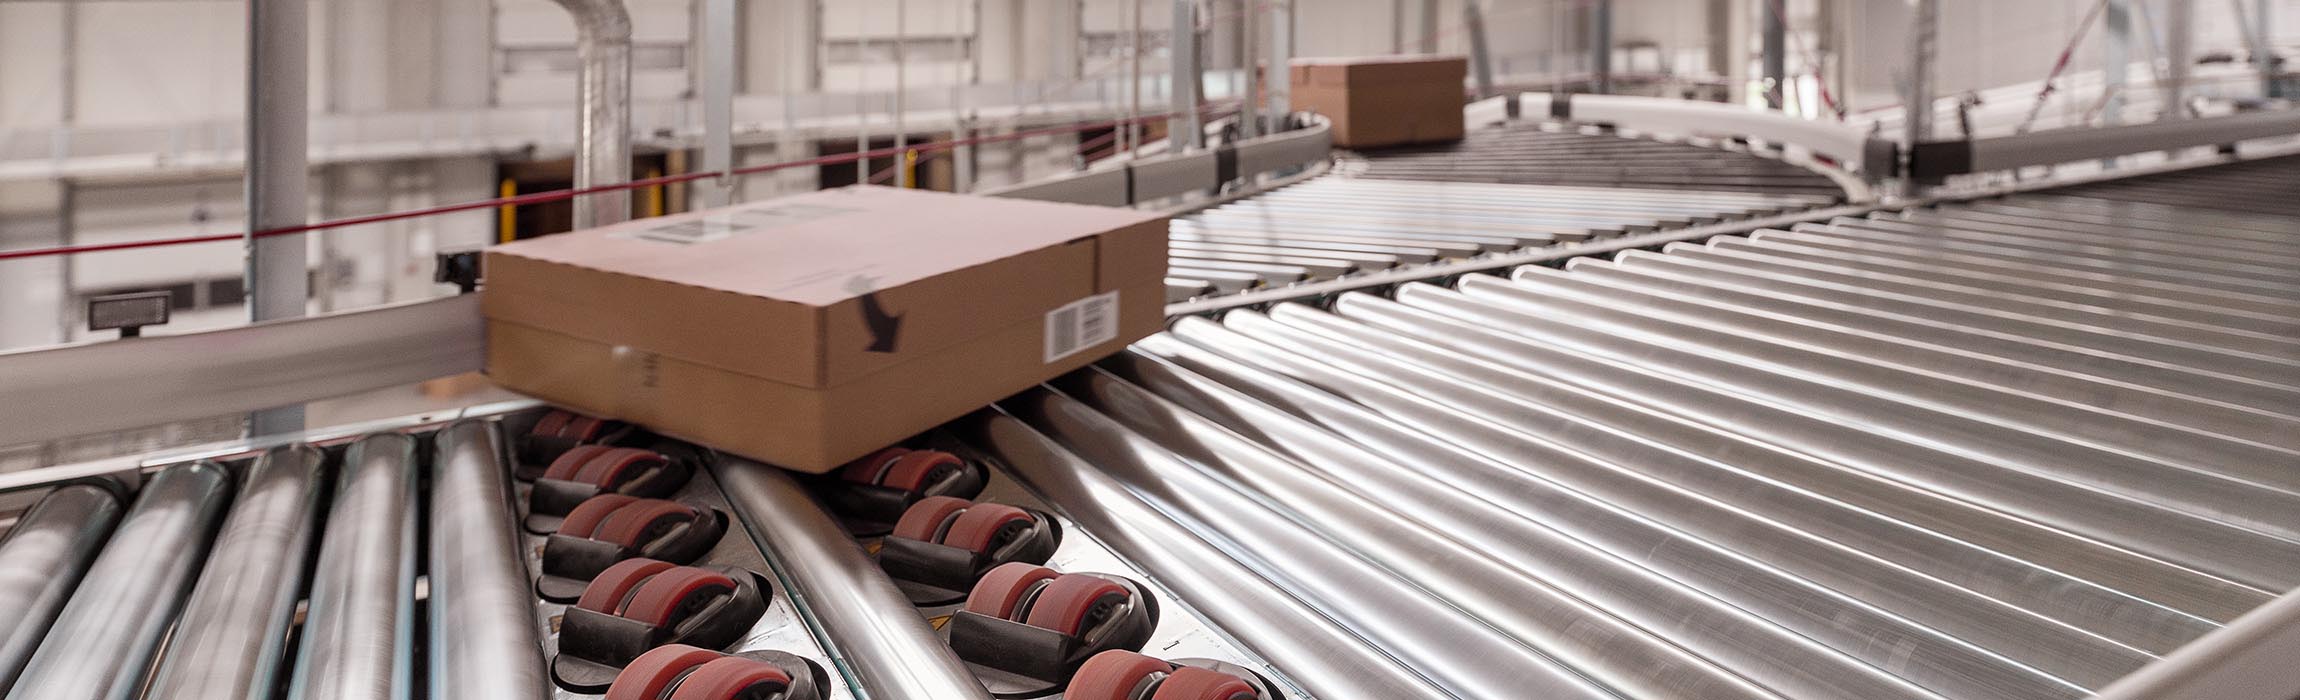 Precise and qualitative intralogistics for your high-performance conveyor technology and sorters.